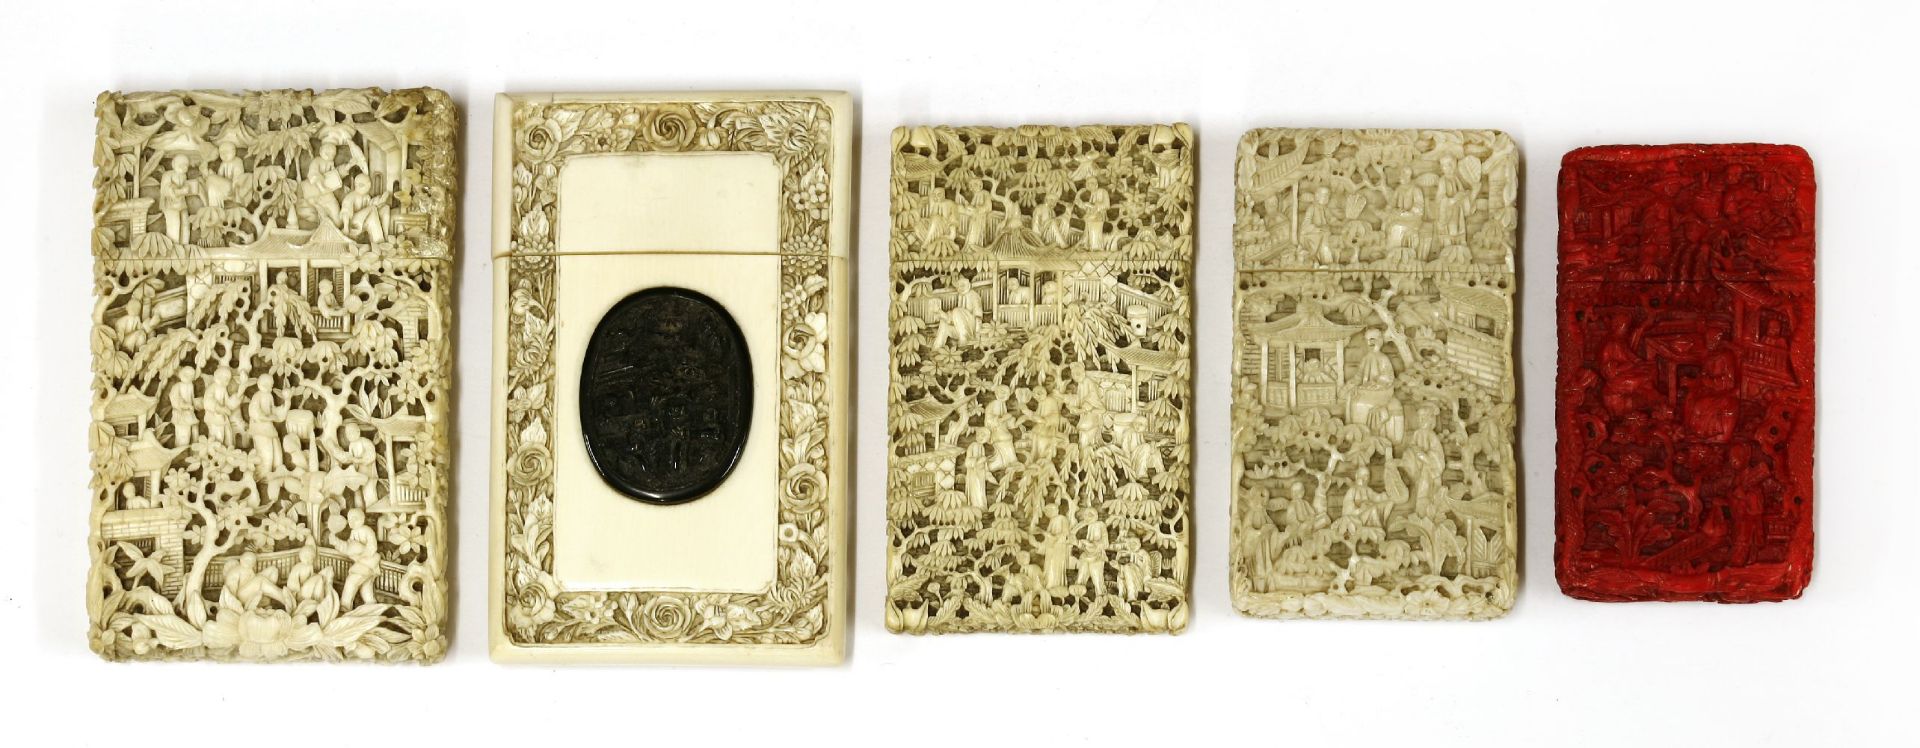 Five ivory cases, carved with figures in landscapes, trees, buildings and flowers, one red